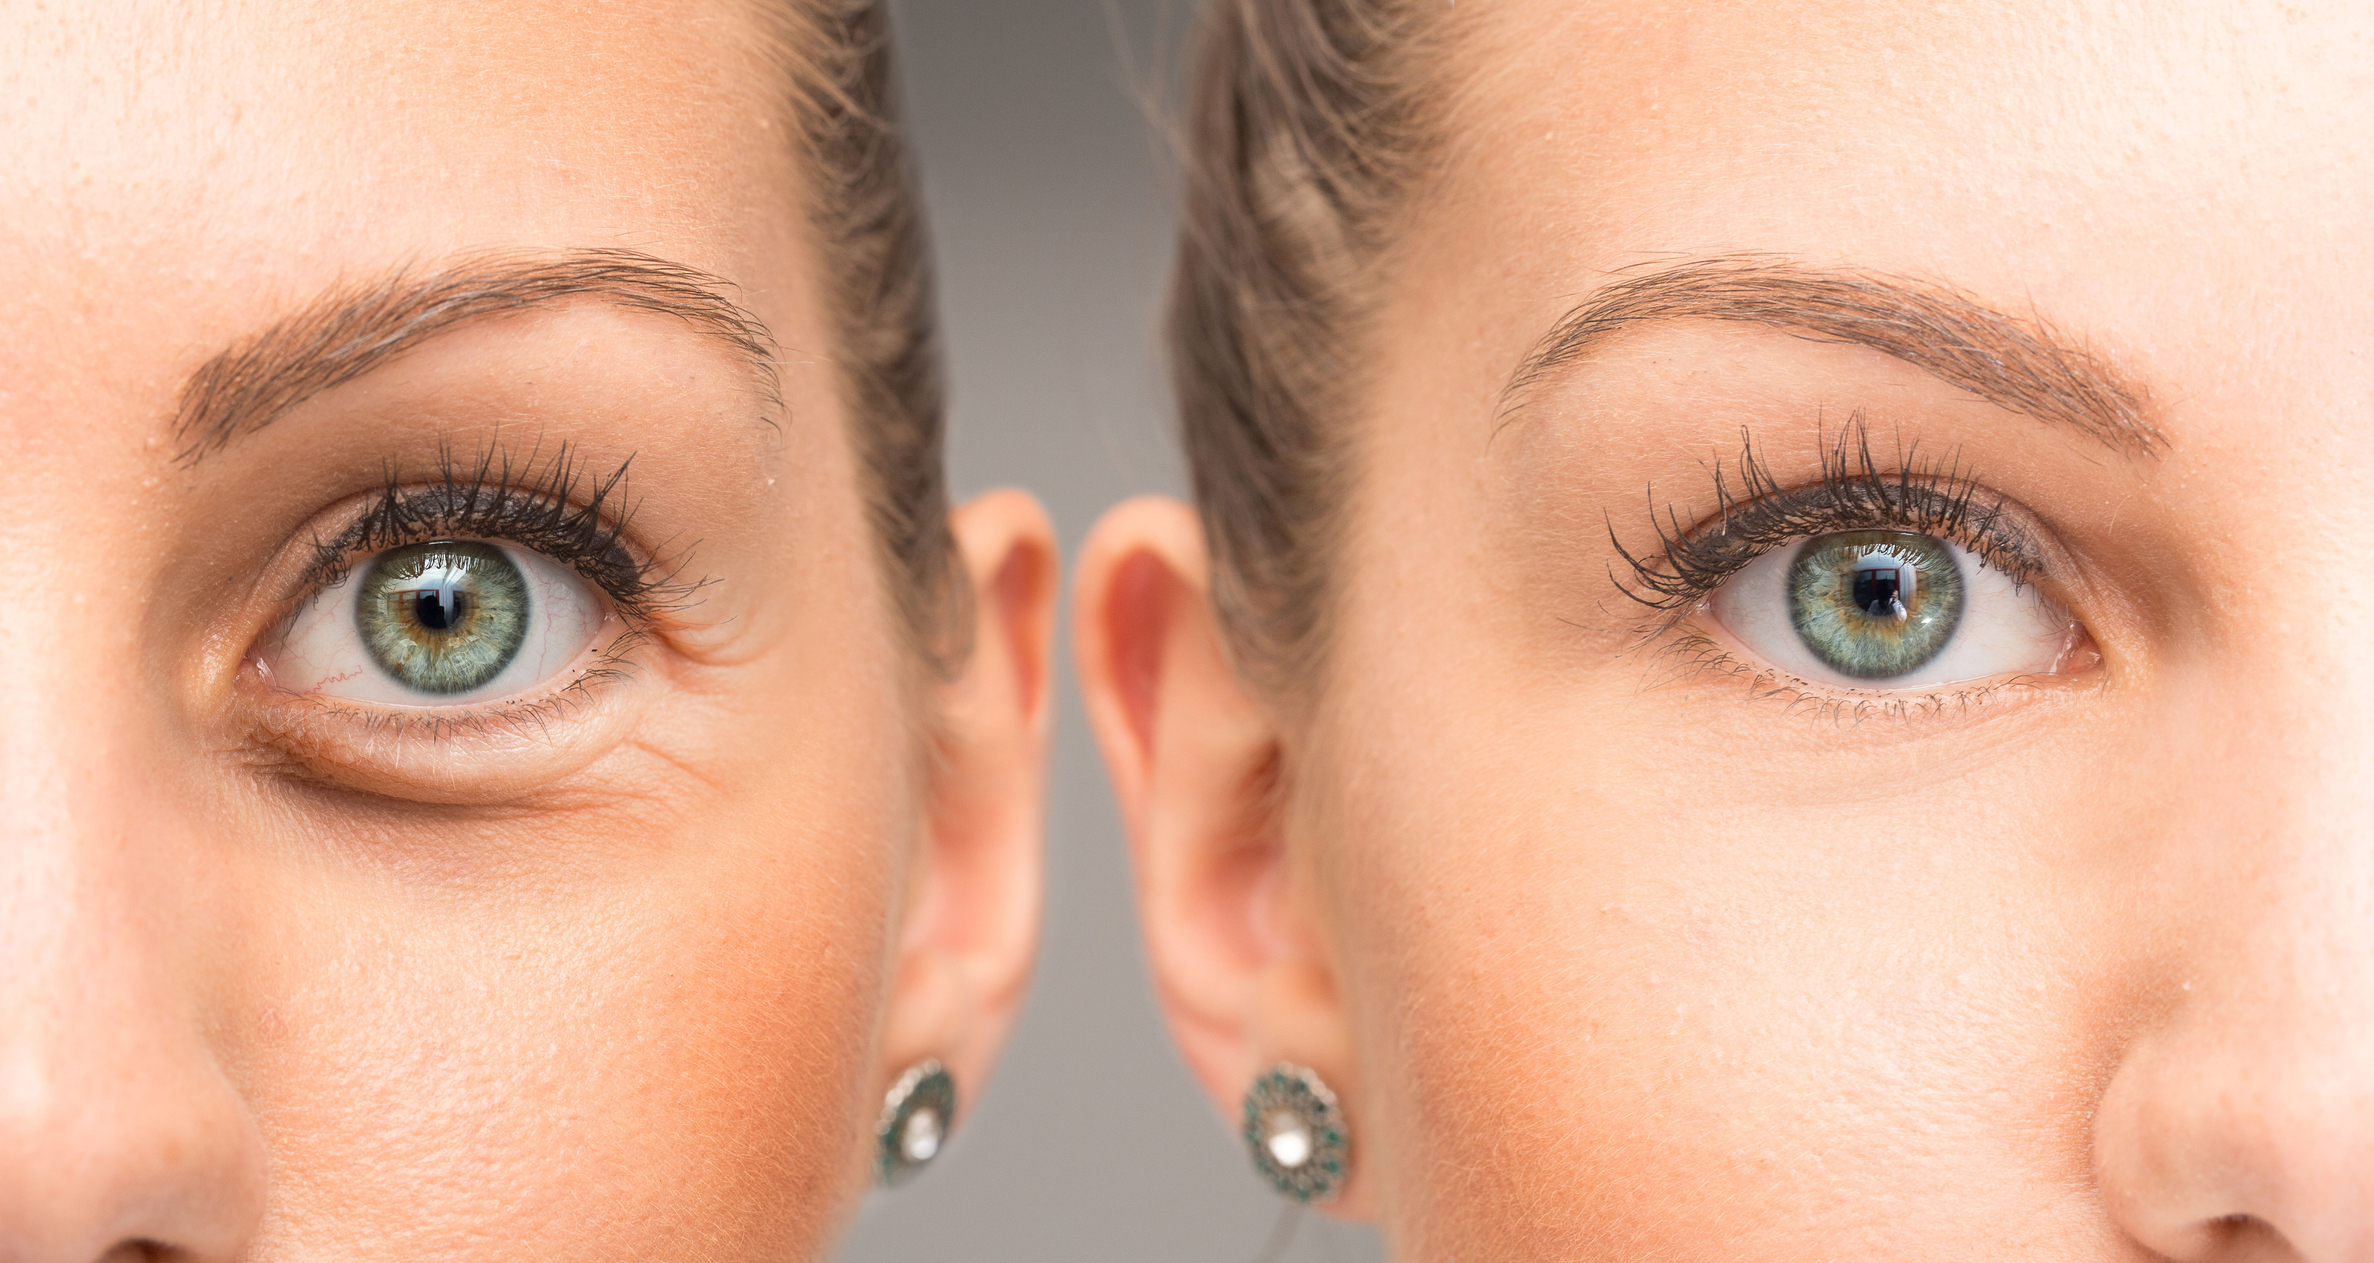 Female eye with wrinkles and crow's feet before and after cosmetic treatment